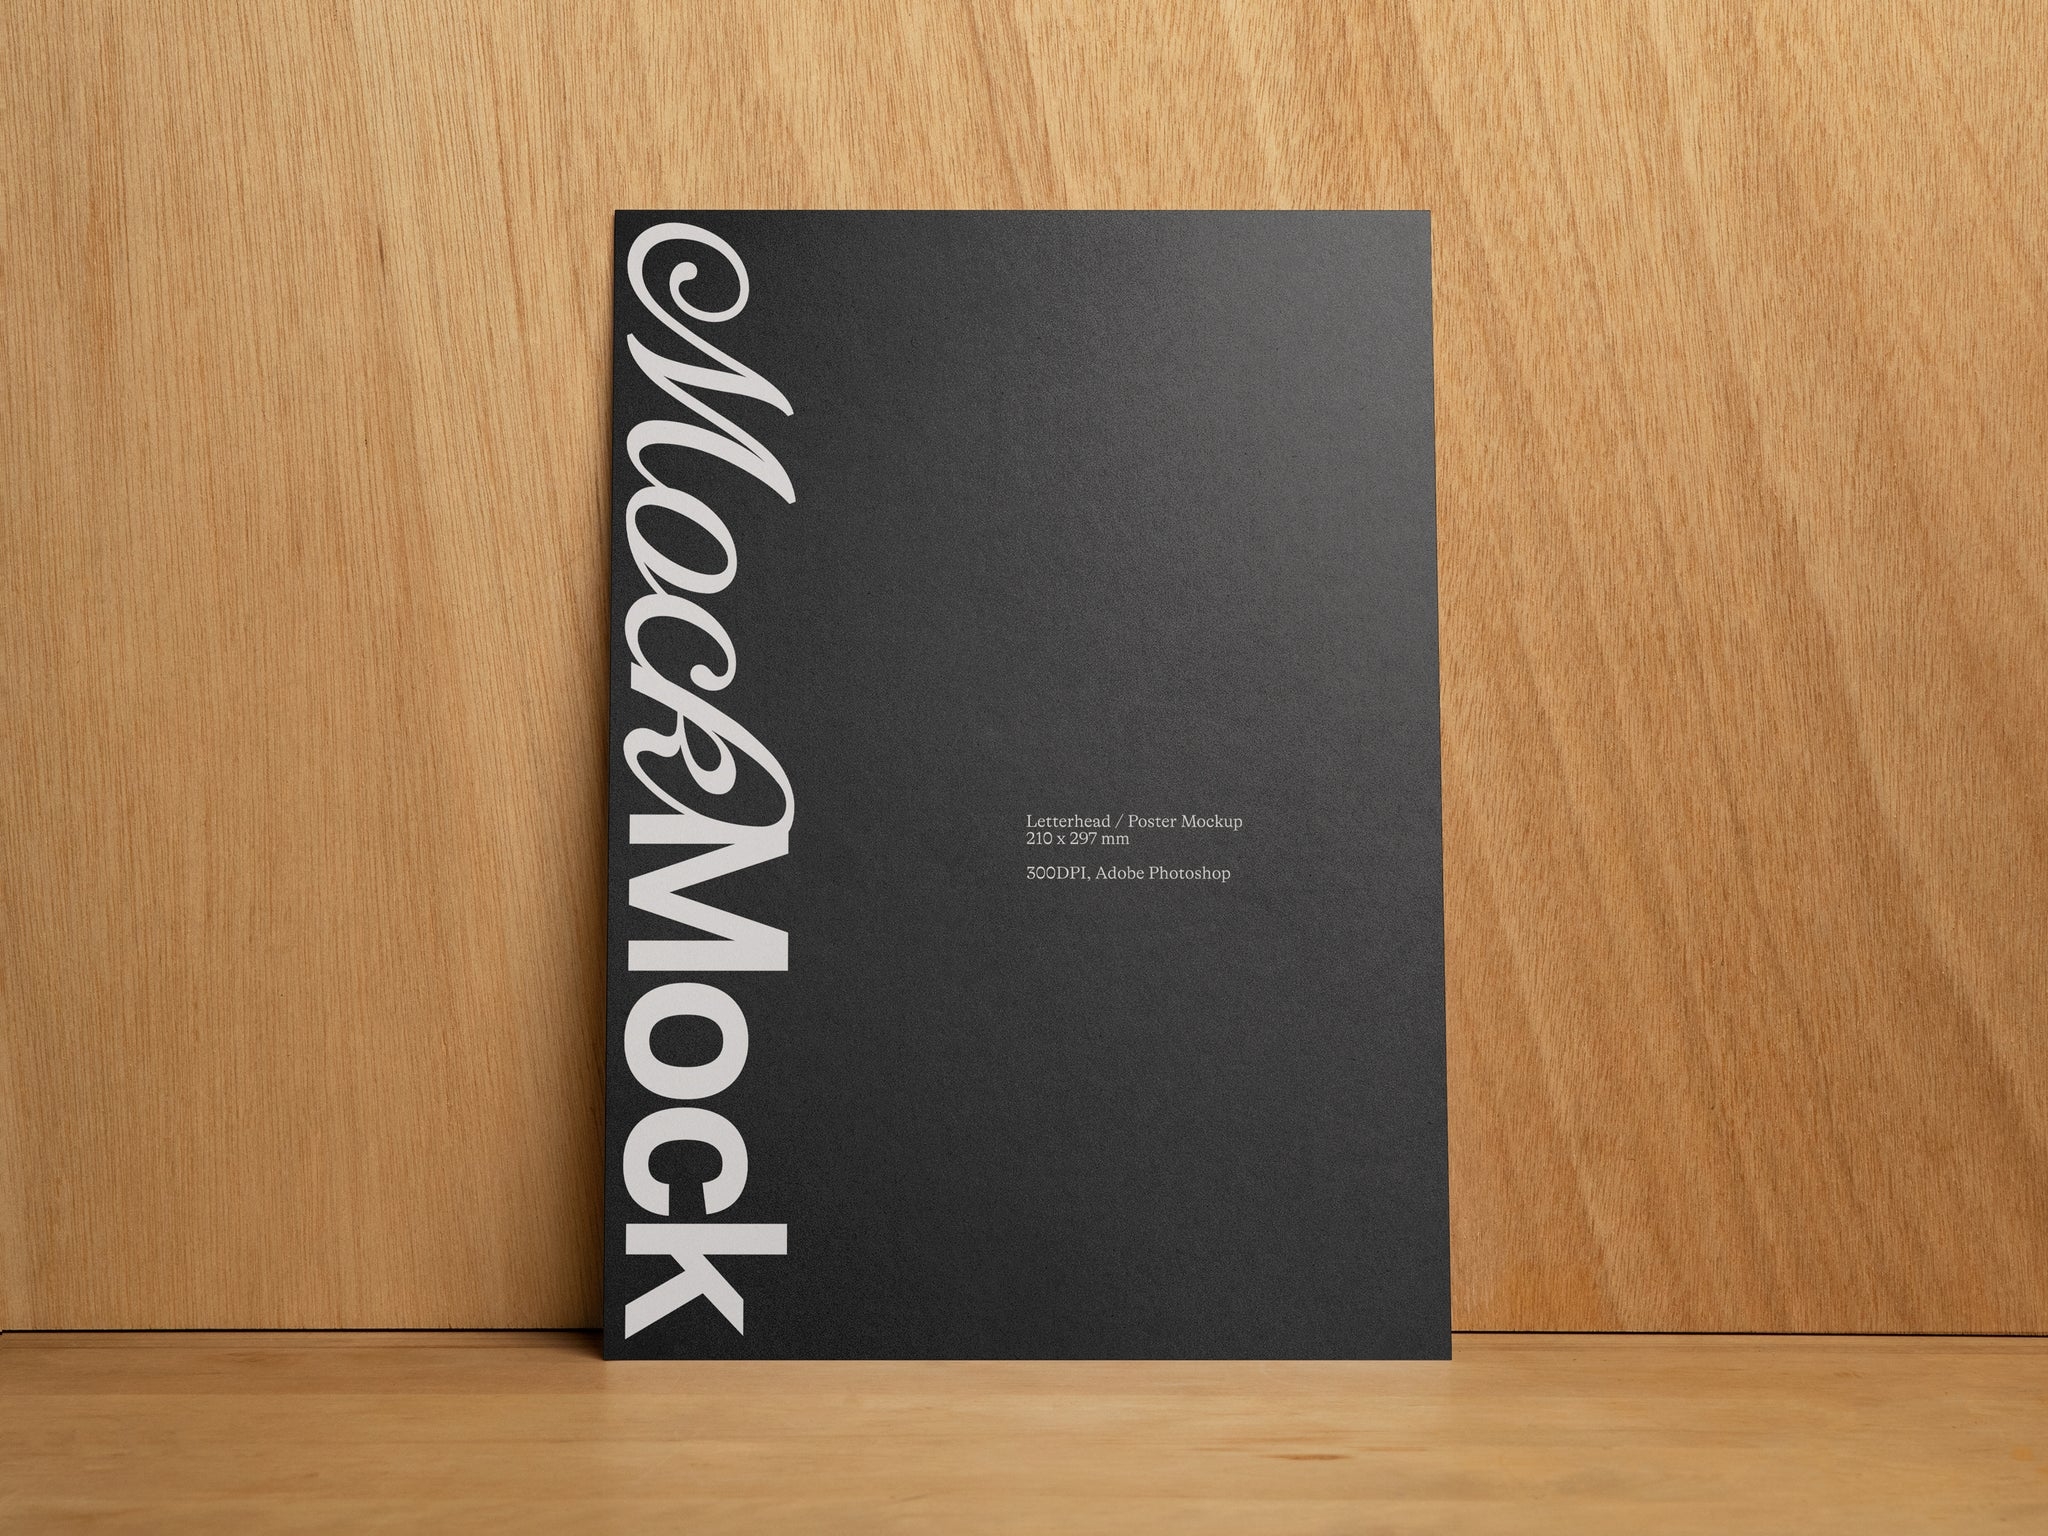 Black poster print mockup standing against a wooden background